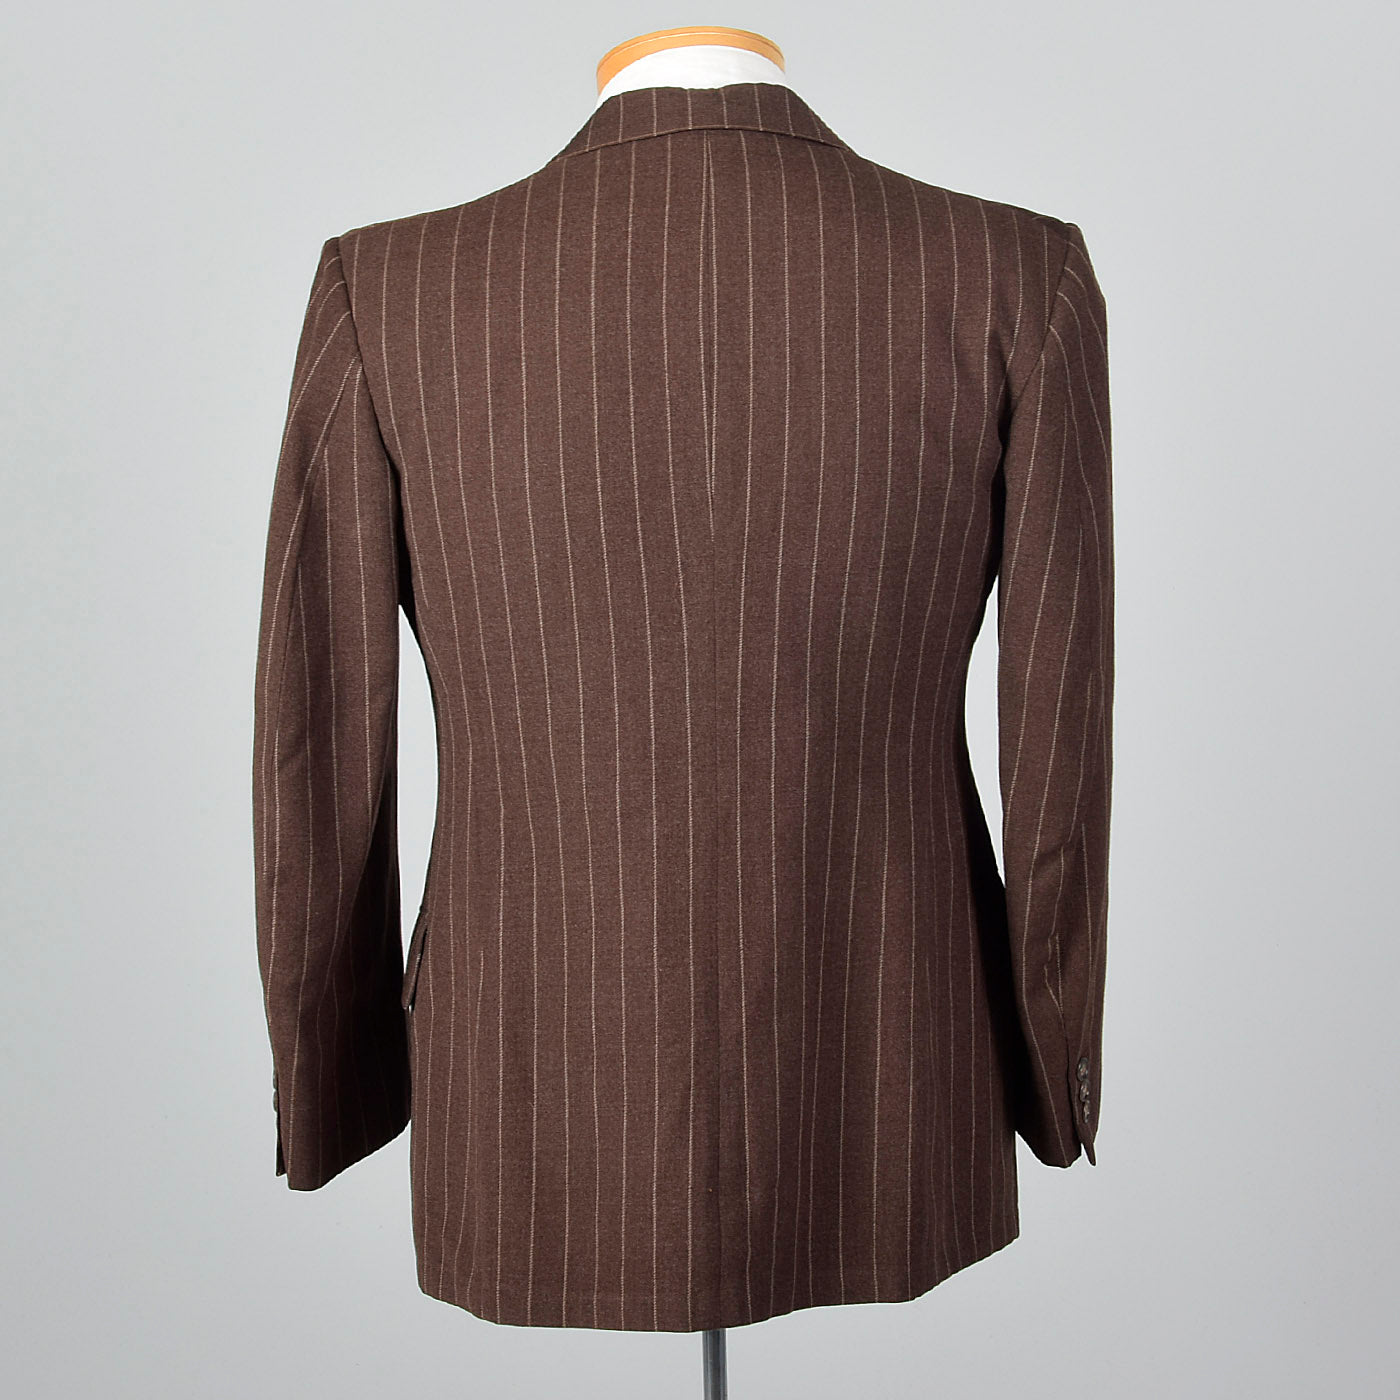 1940s Mens Brown Striped Jacket with Double Breasted Front